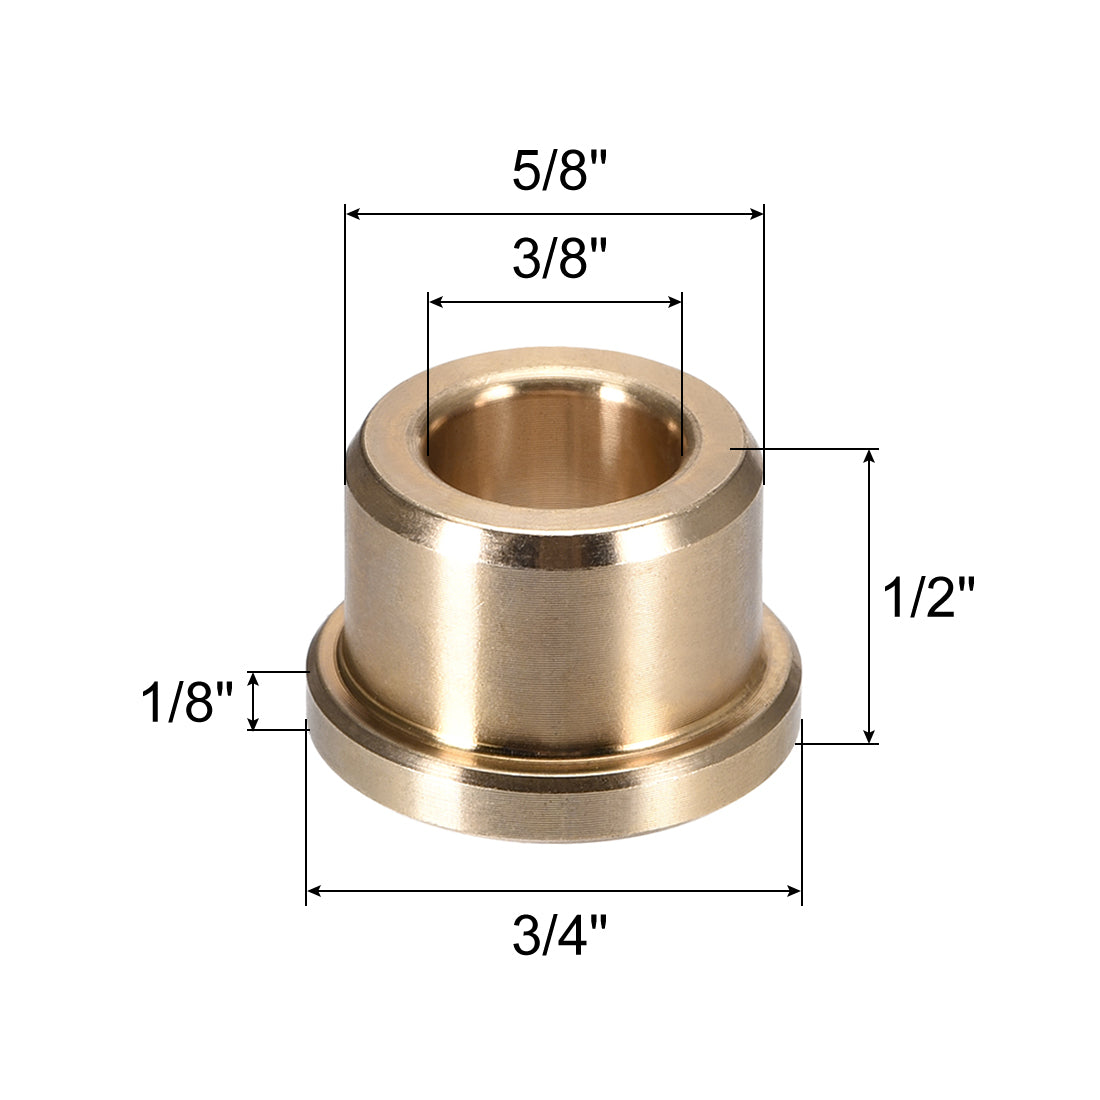 uxcell Uxcell Flange Bearing Sleeve, 3/8" x 5/8" x 1/2" Sintered Bronze Bushings